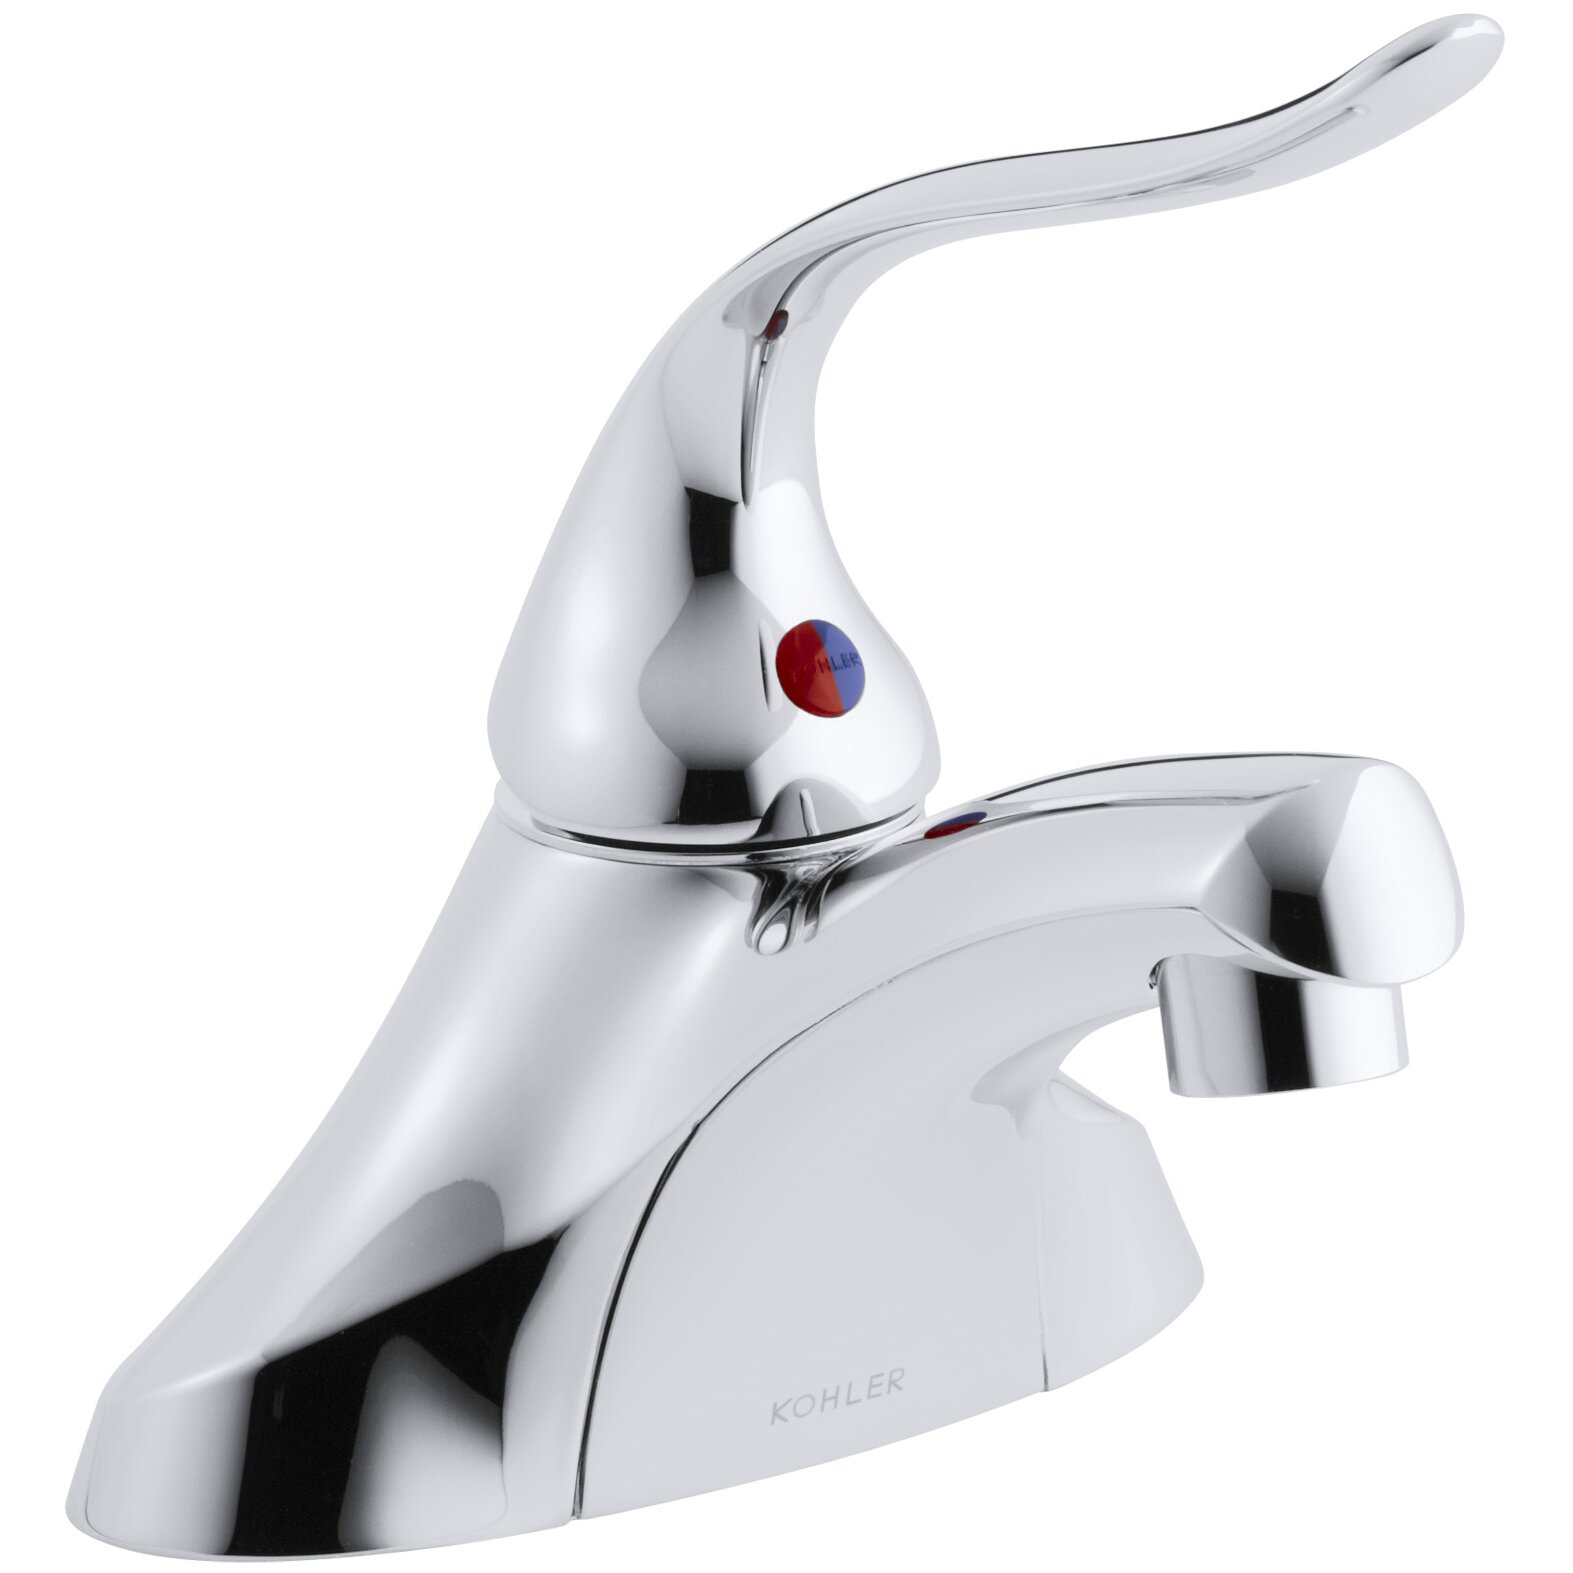 Kohler Coralais Single Control Centerset Lavatory Faucet With Ground Joints 0.5 GPM Spray Grid Drain And 5 Lever Handle 15597 5P 